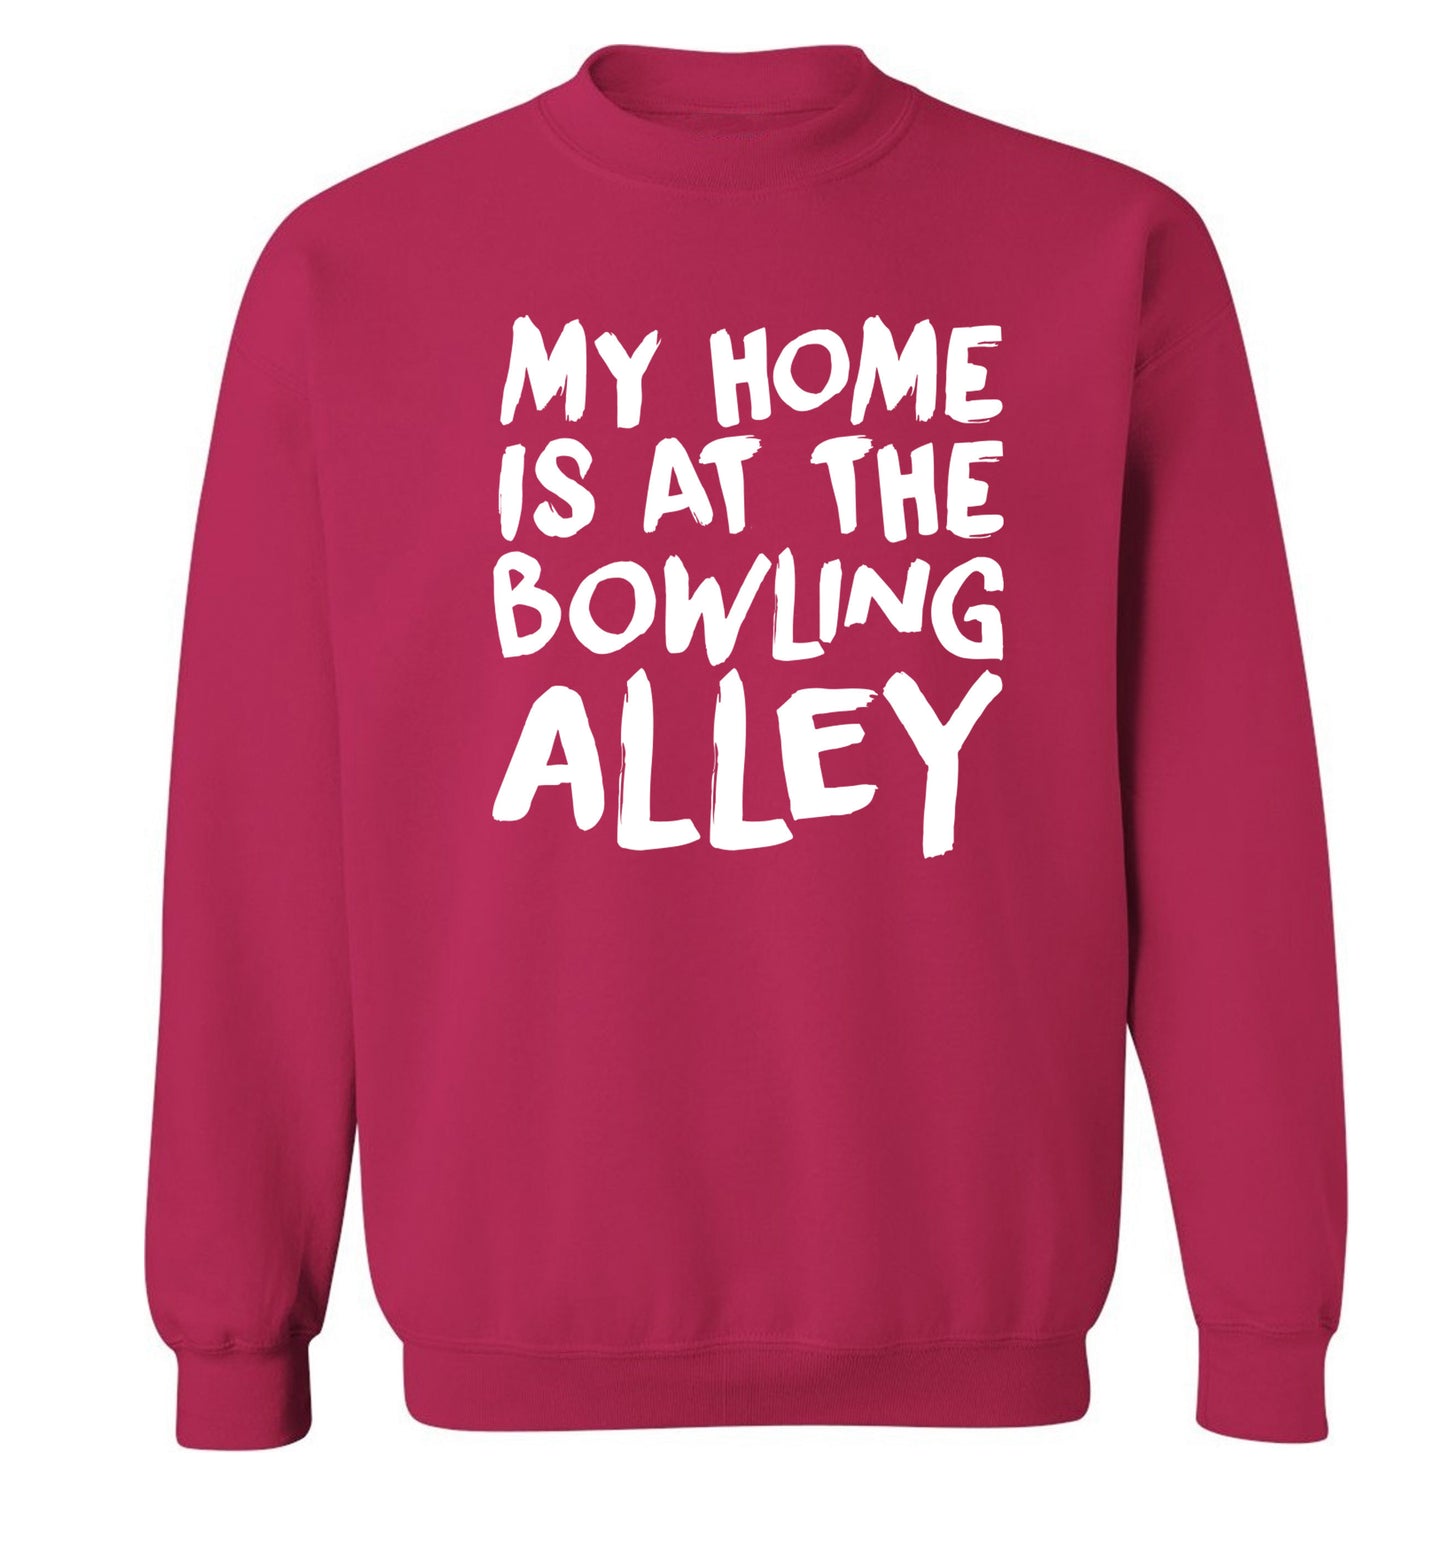 My home is at the bowling alley Adult's unisex pink Sweater 2XL